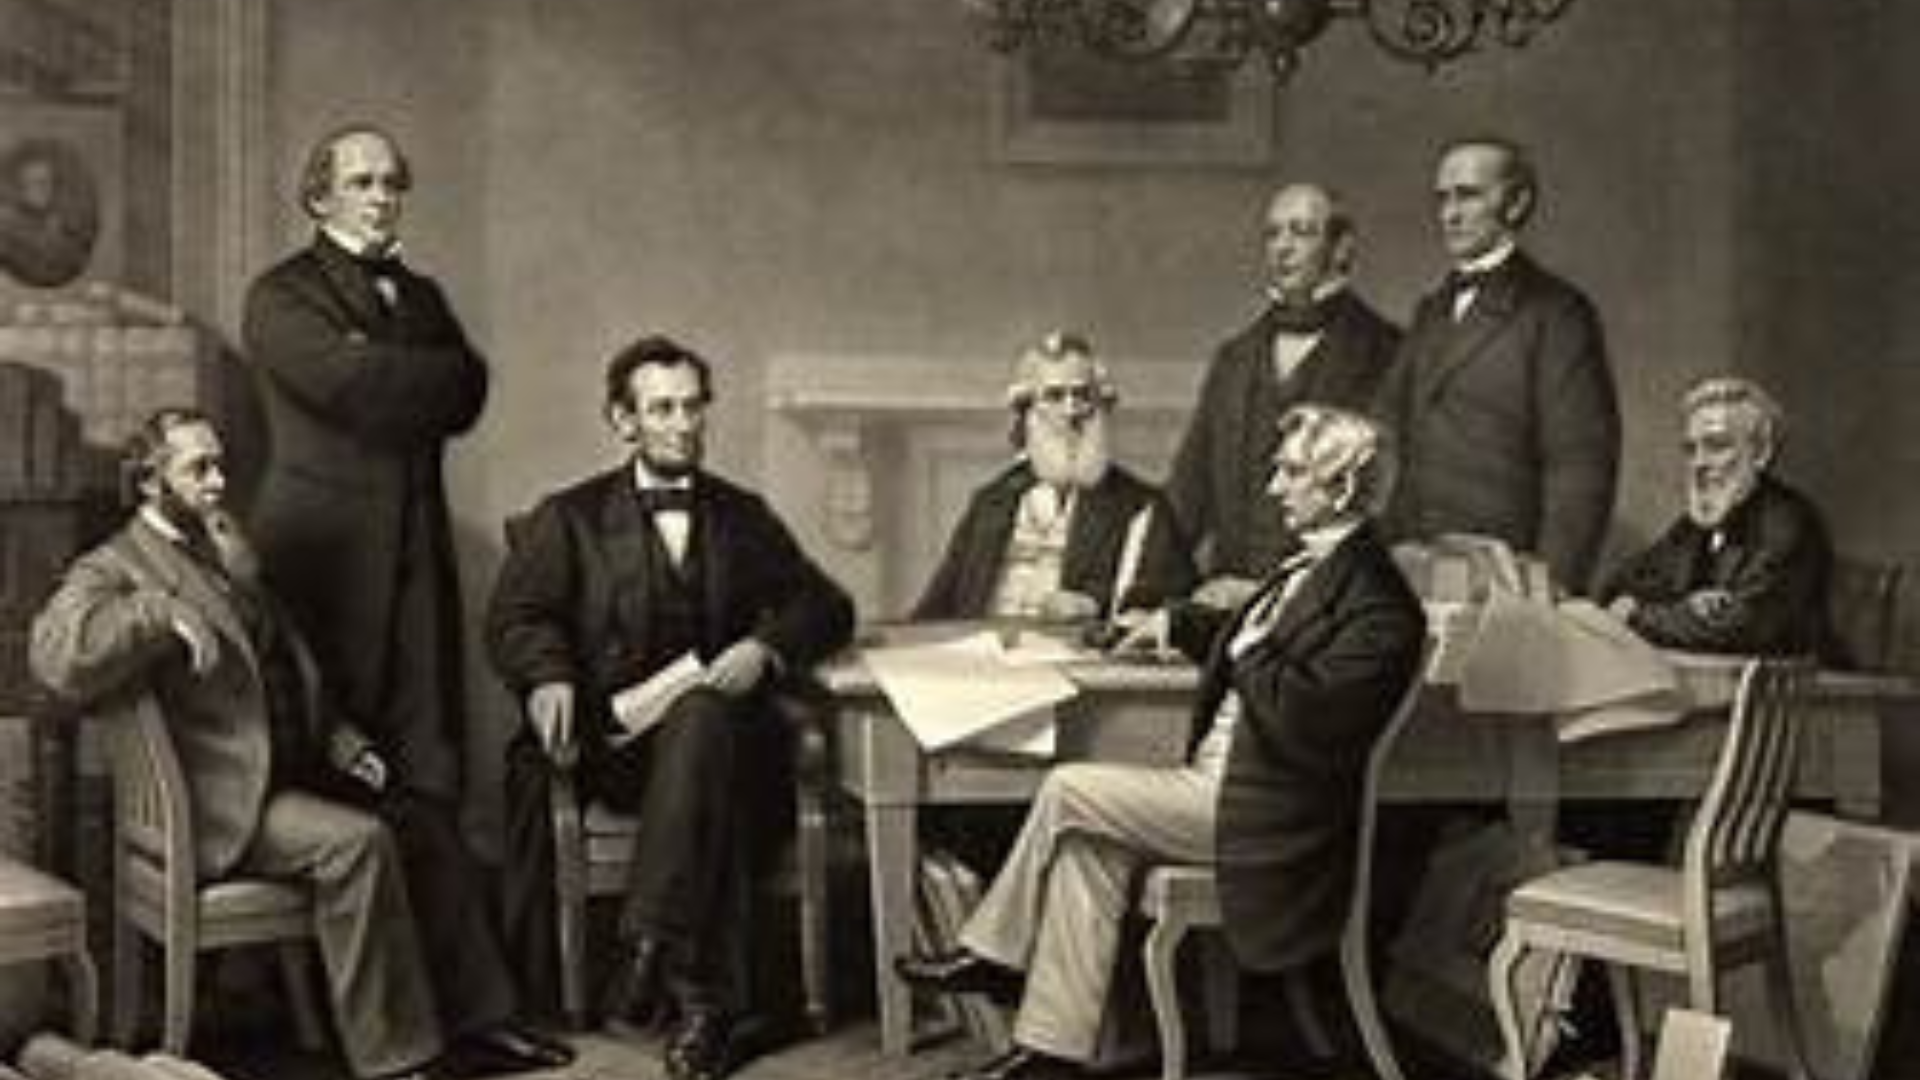 abraham lincoln and the emancipation proclamation